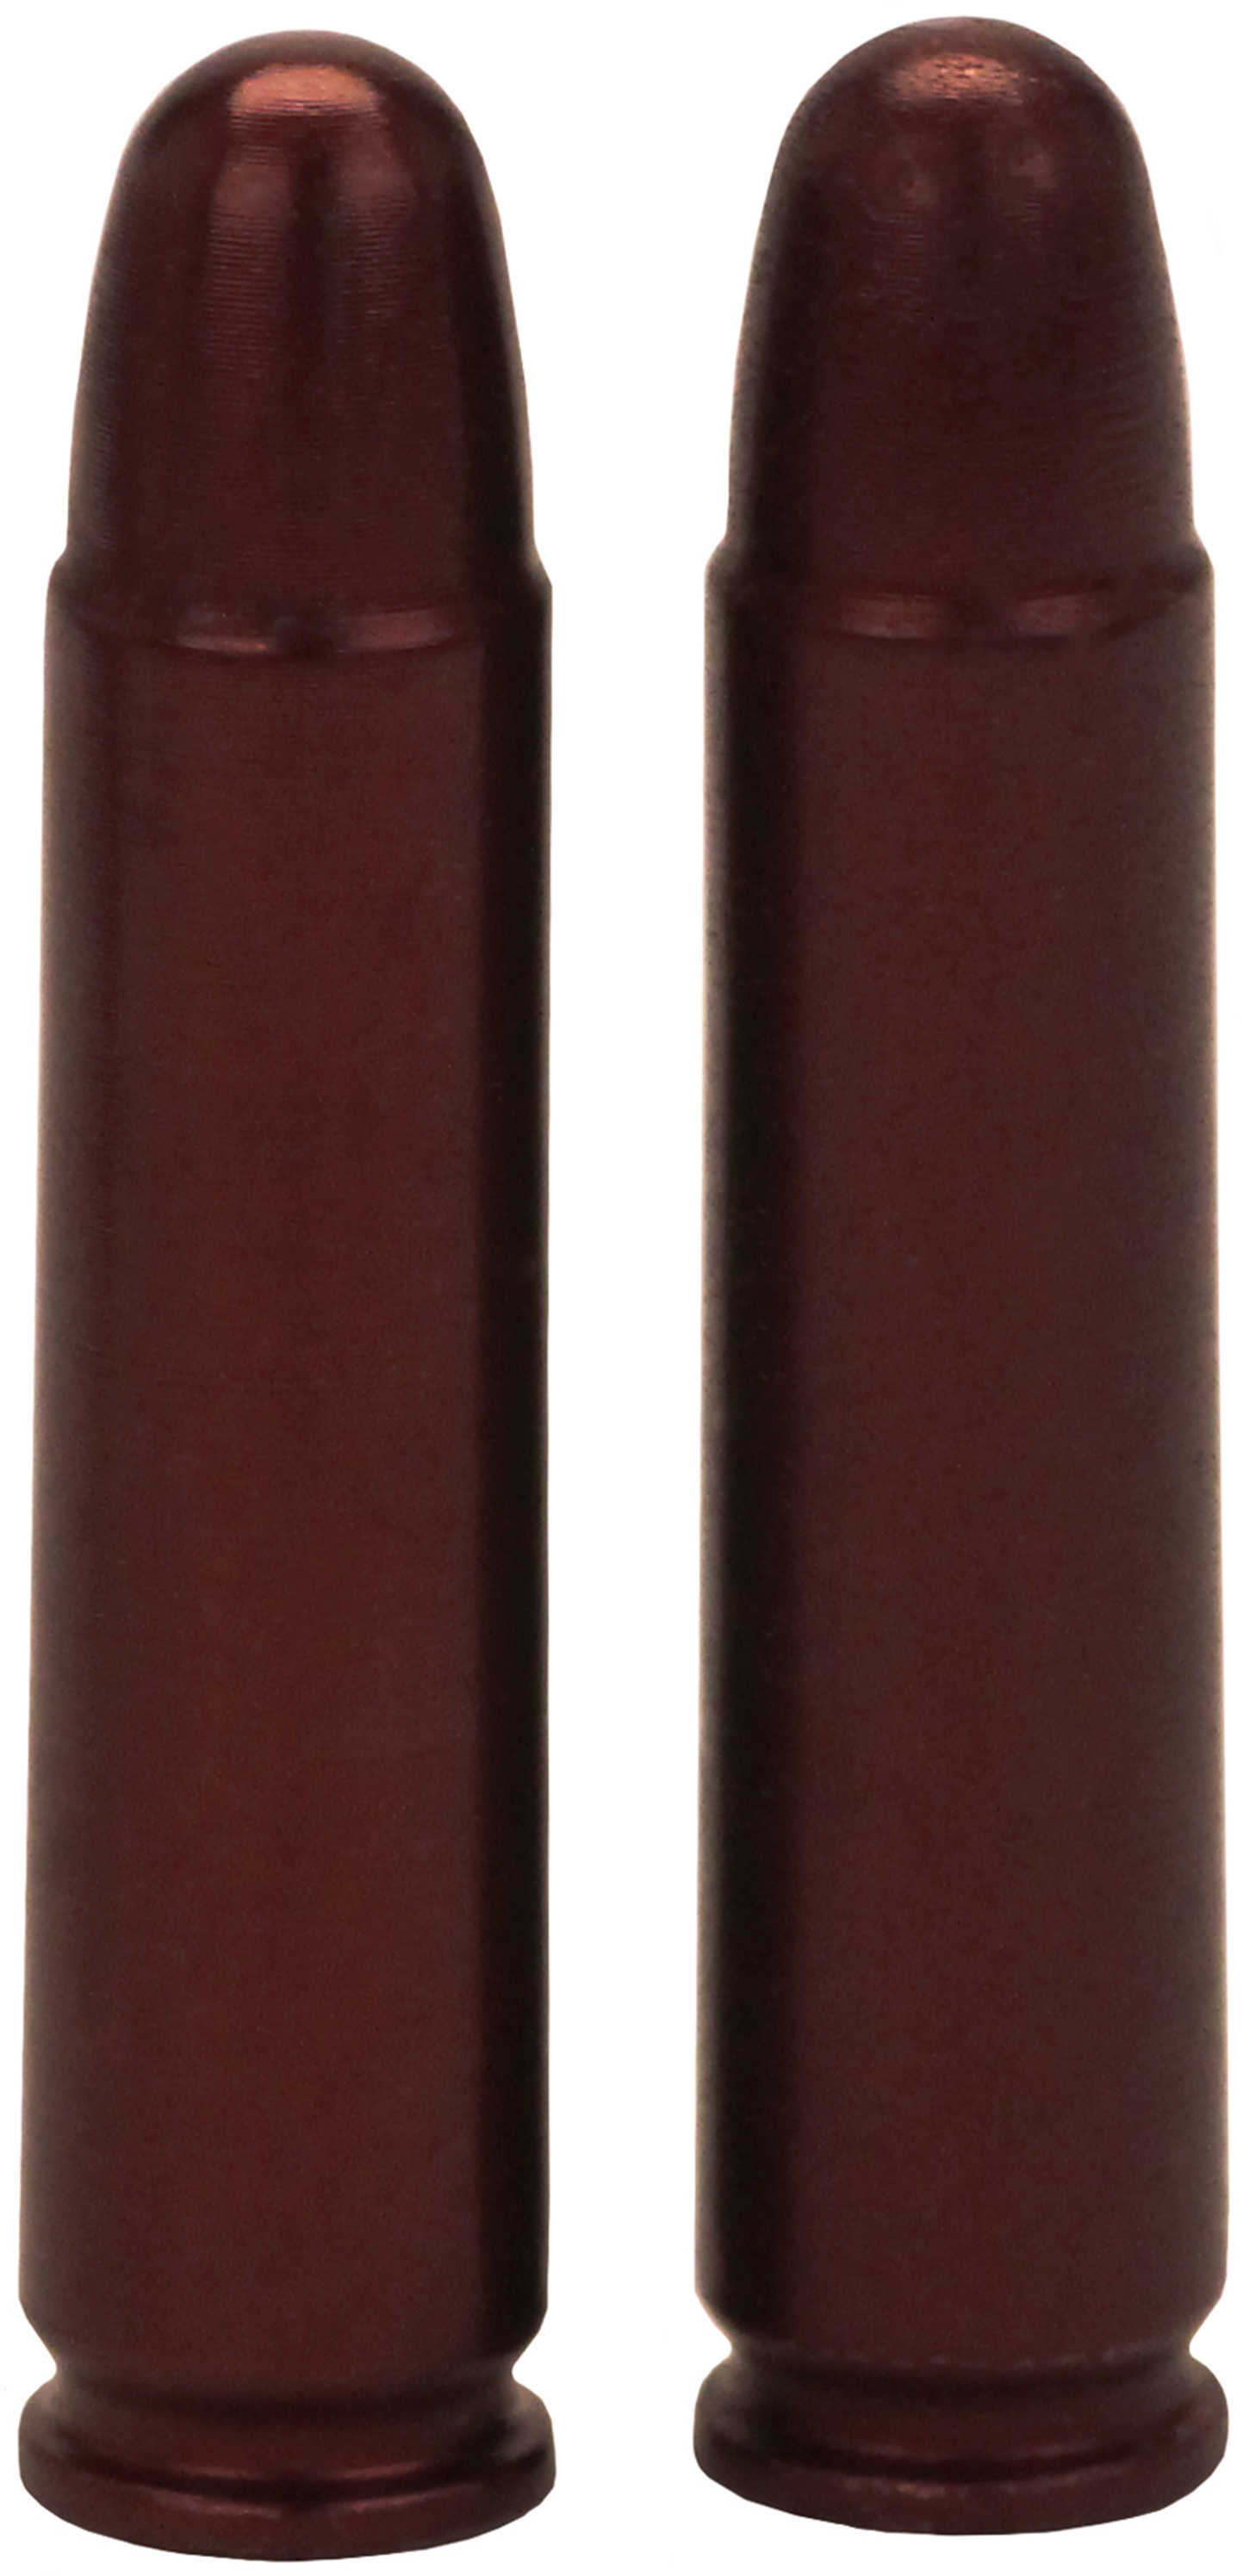 A-Zoom Pachmayr Rifle Metal Snap Caps 30 Carbine (Per 2) 12225